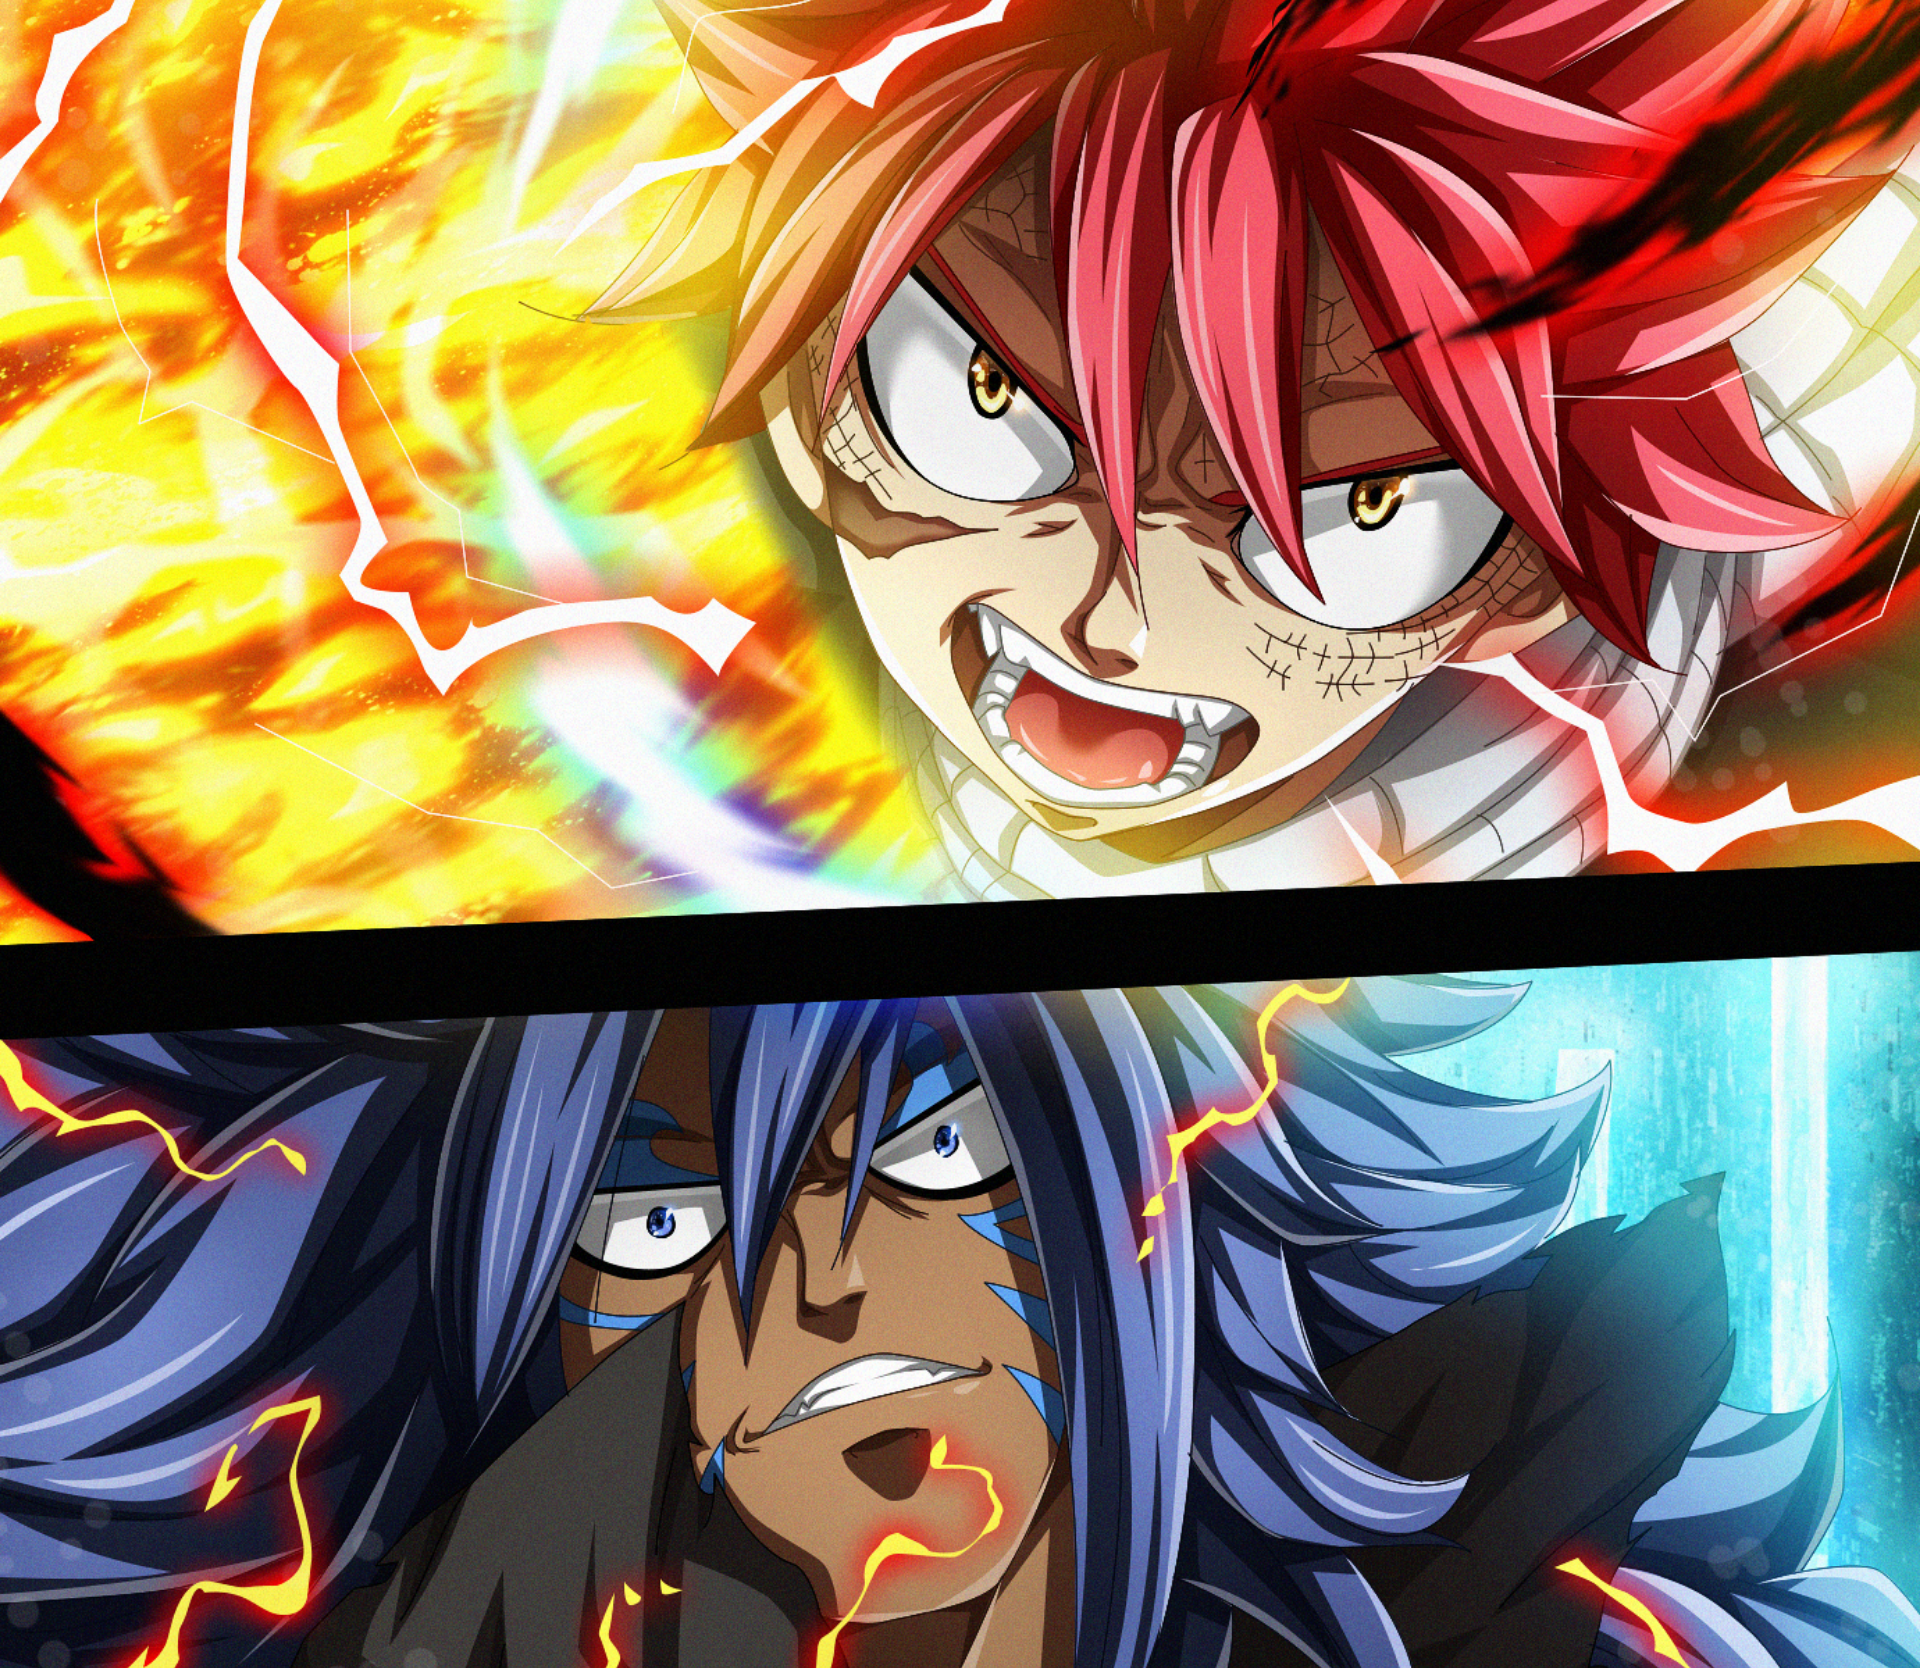 The king dragon Acnologia Lucy  Fairy tail wallpaper  Facebook